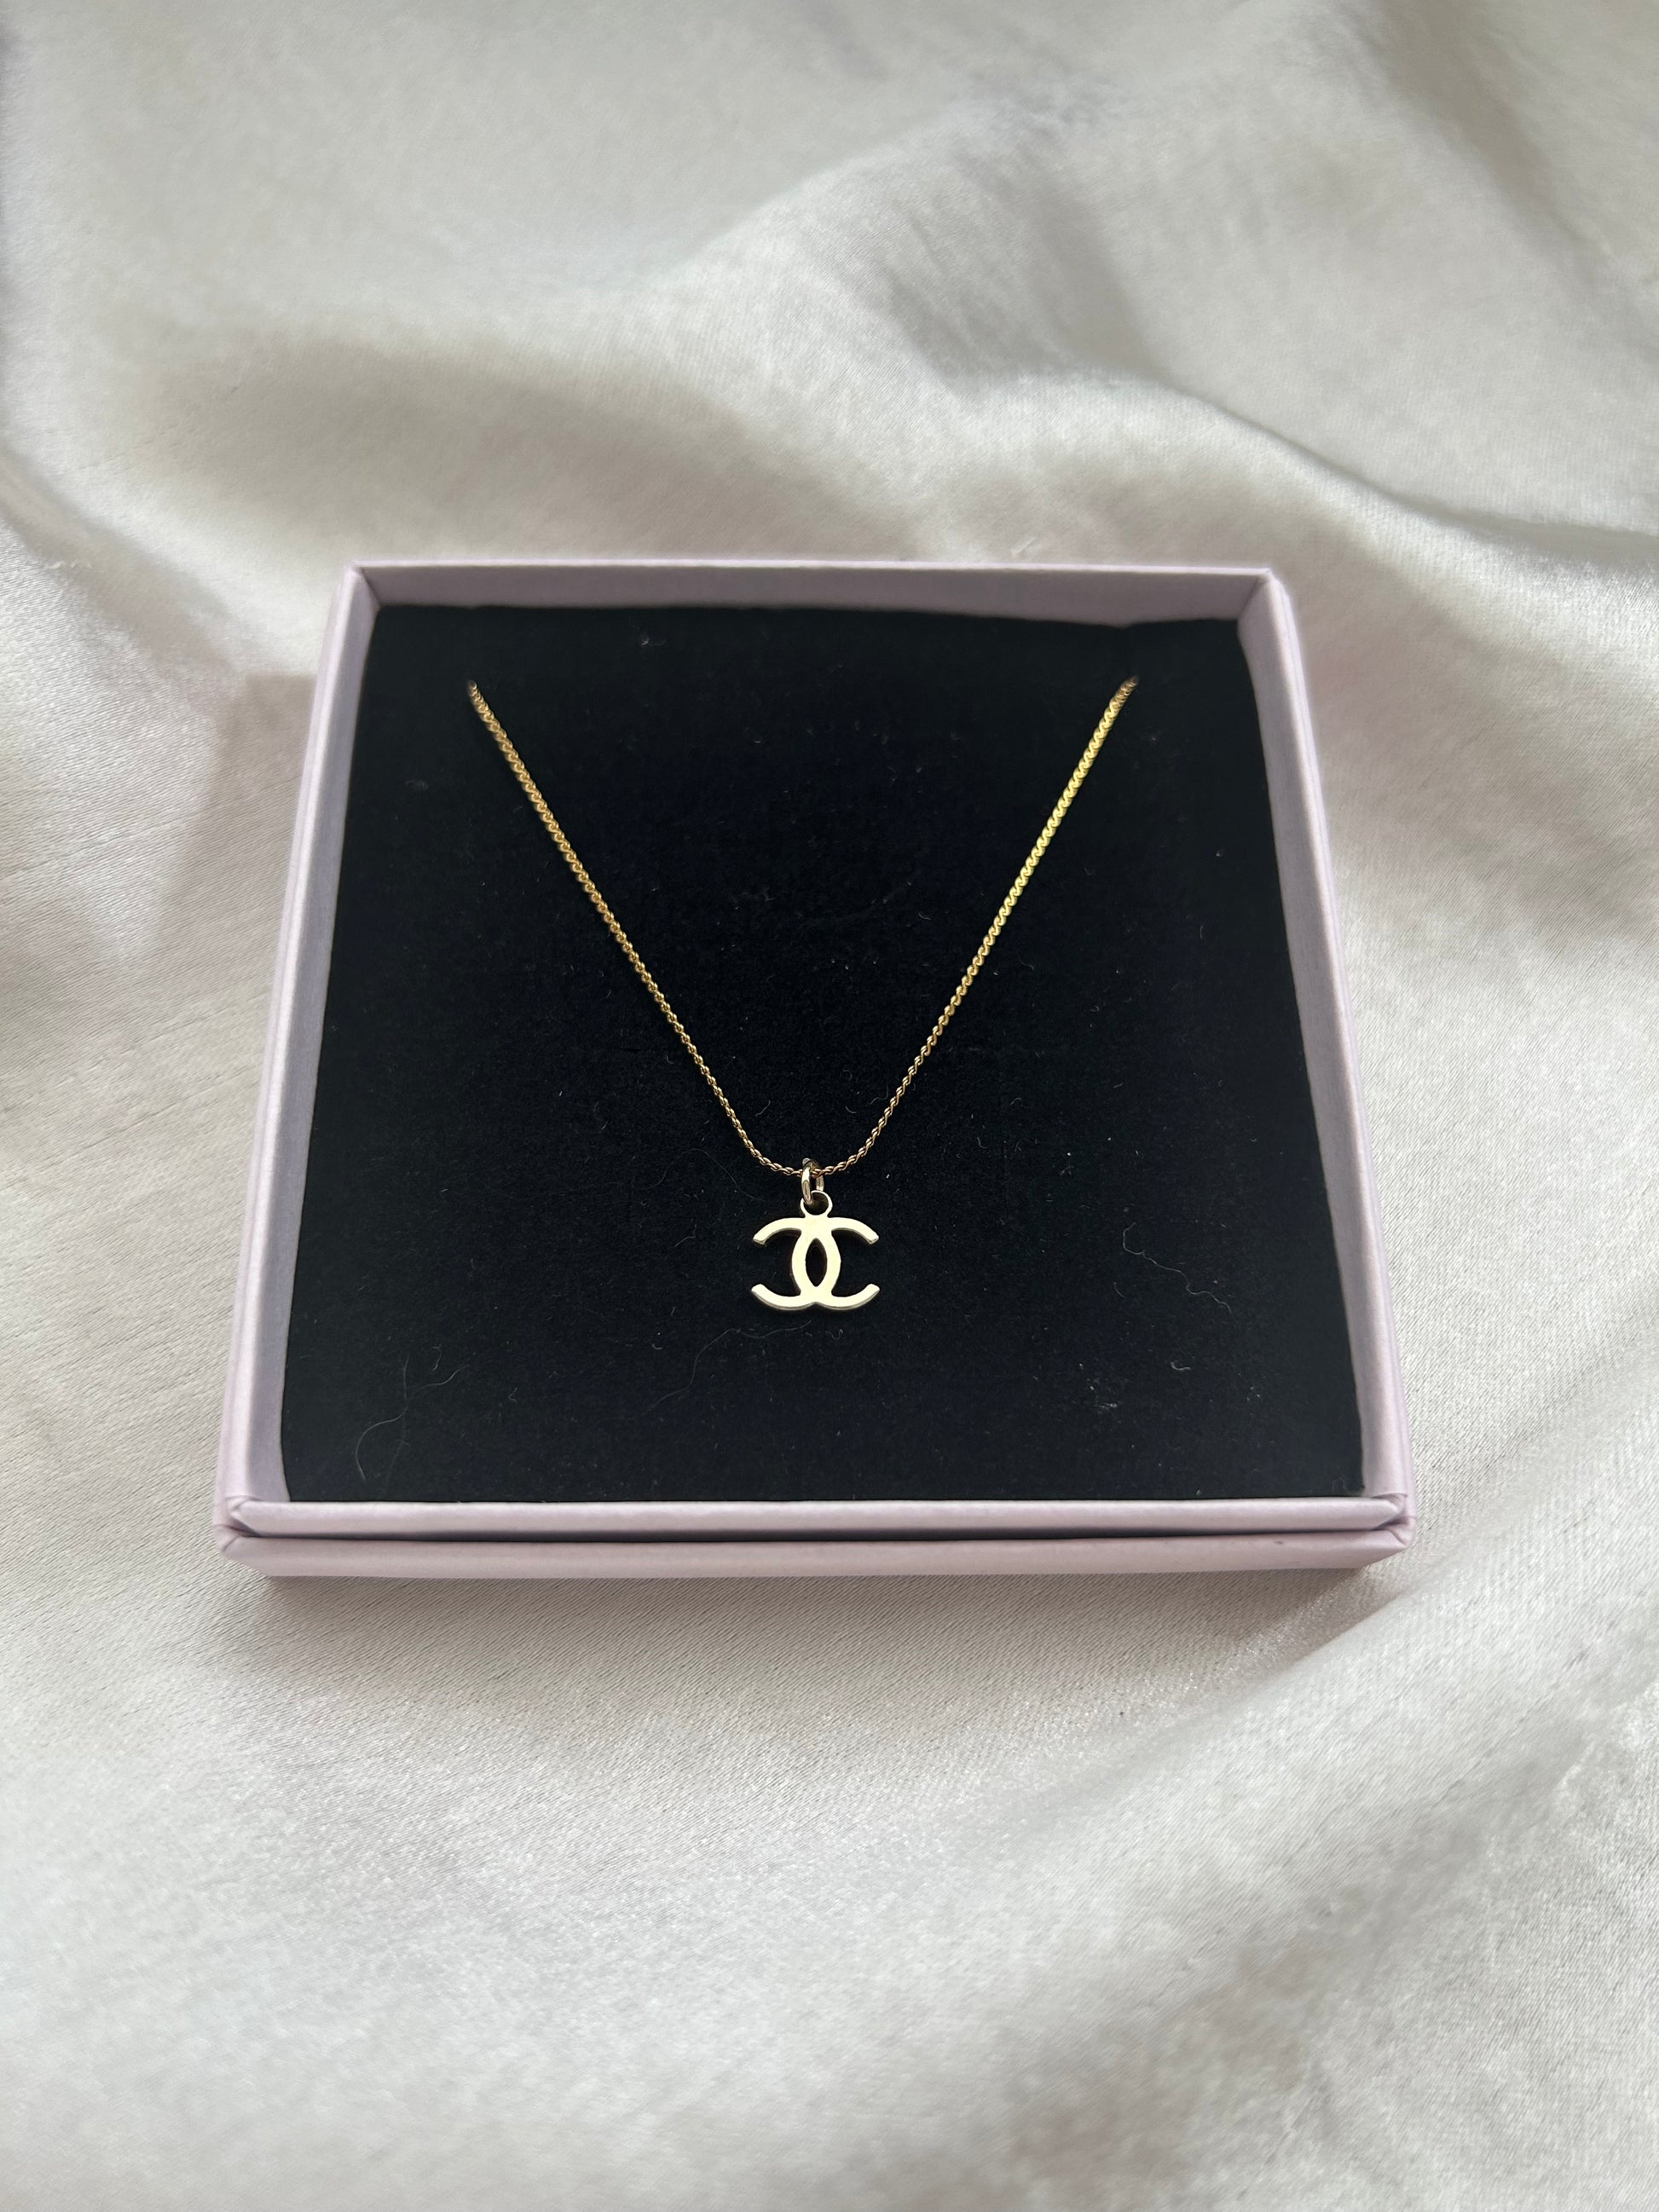 Authentic Reworked Delicate Chanel Necklace - Ultra thin chain